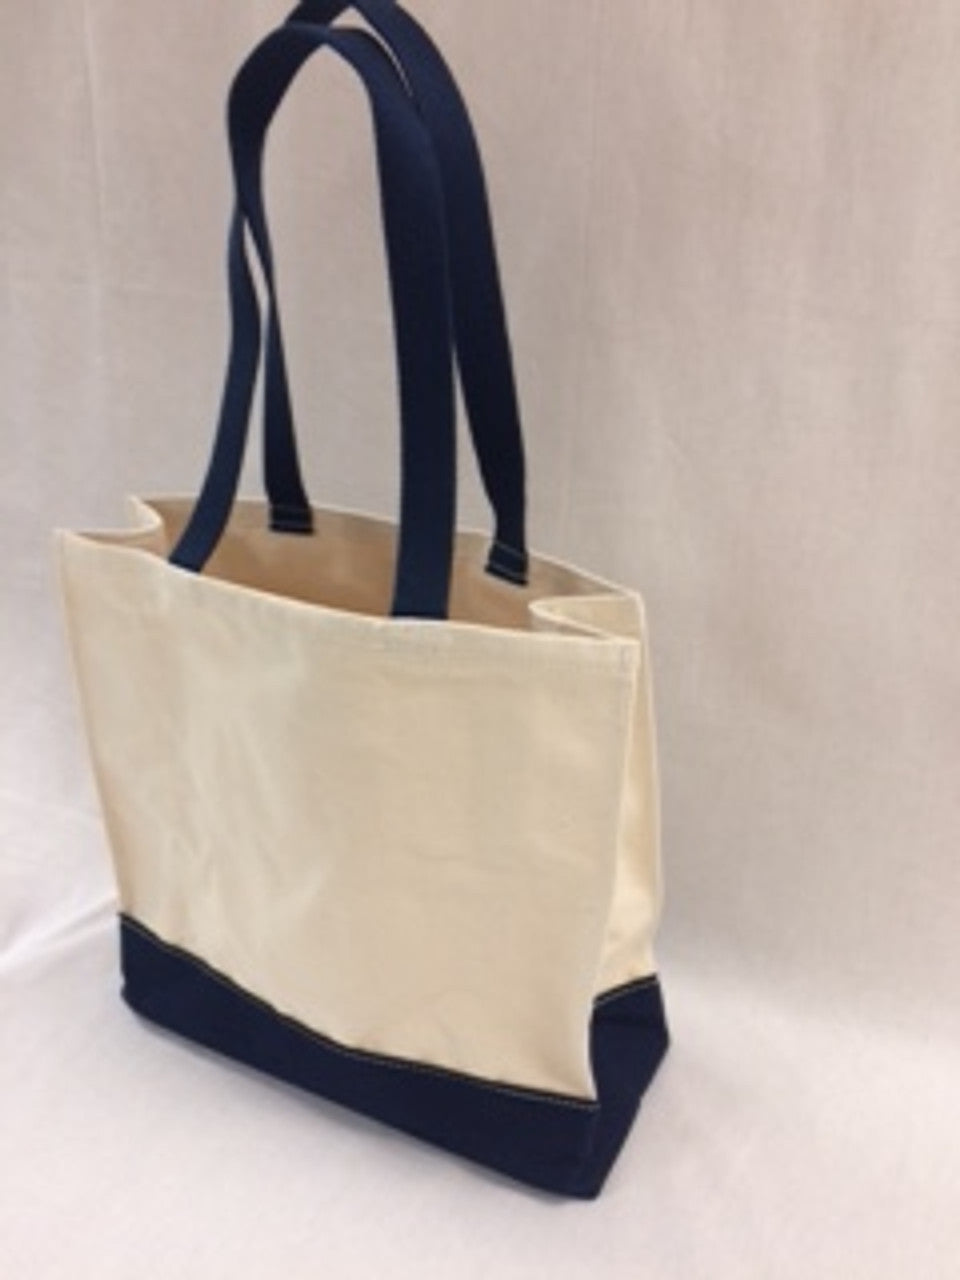 Customization - Embroidered Canvas Totes